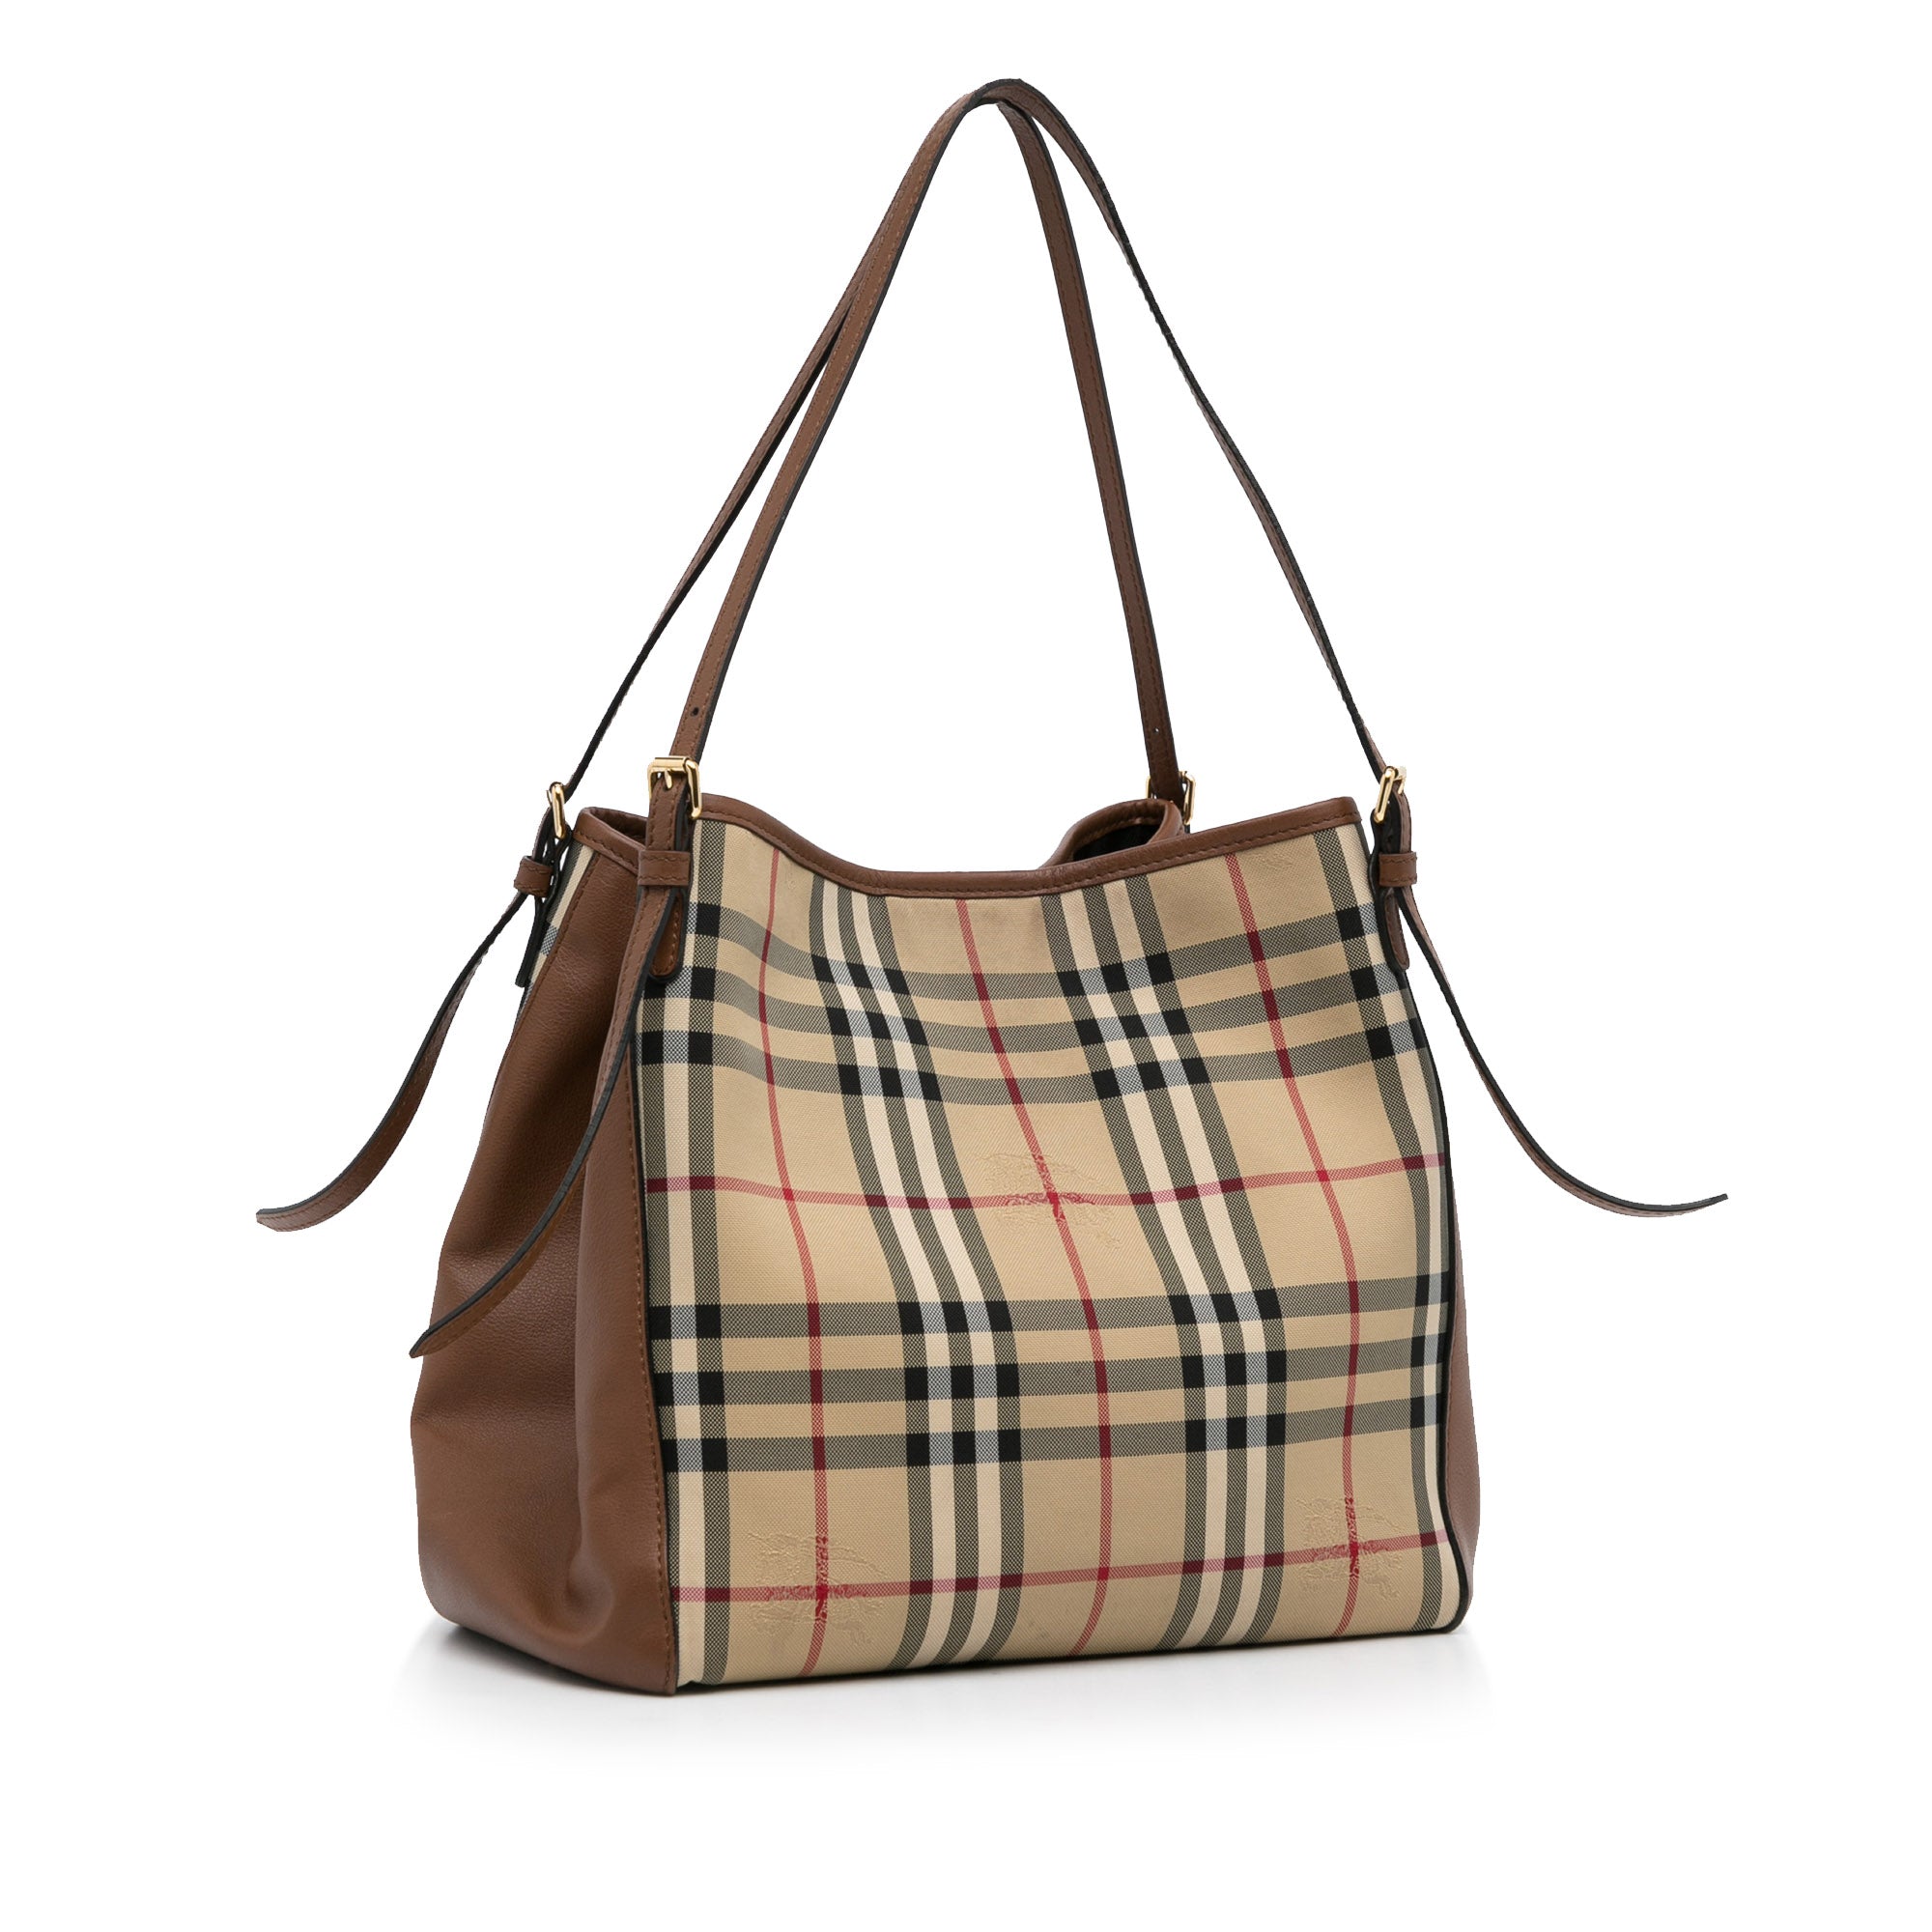 Burberry Canterbury large bag/tote in Haymarket check - clothing